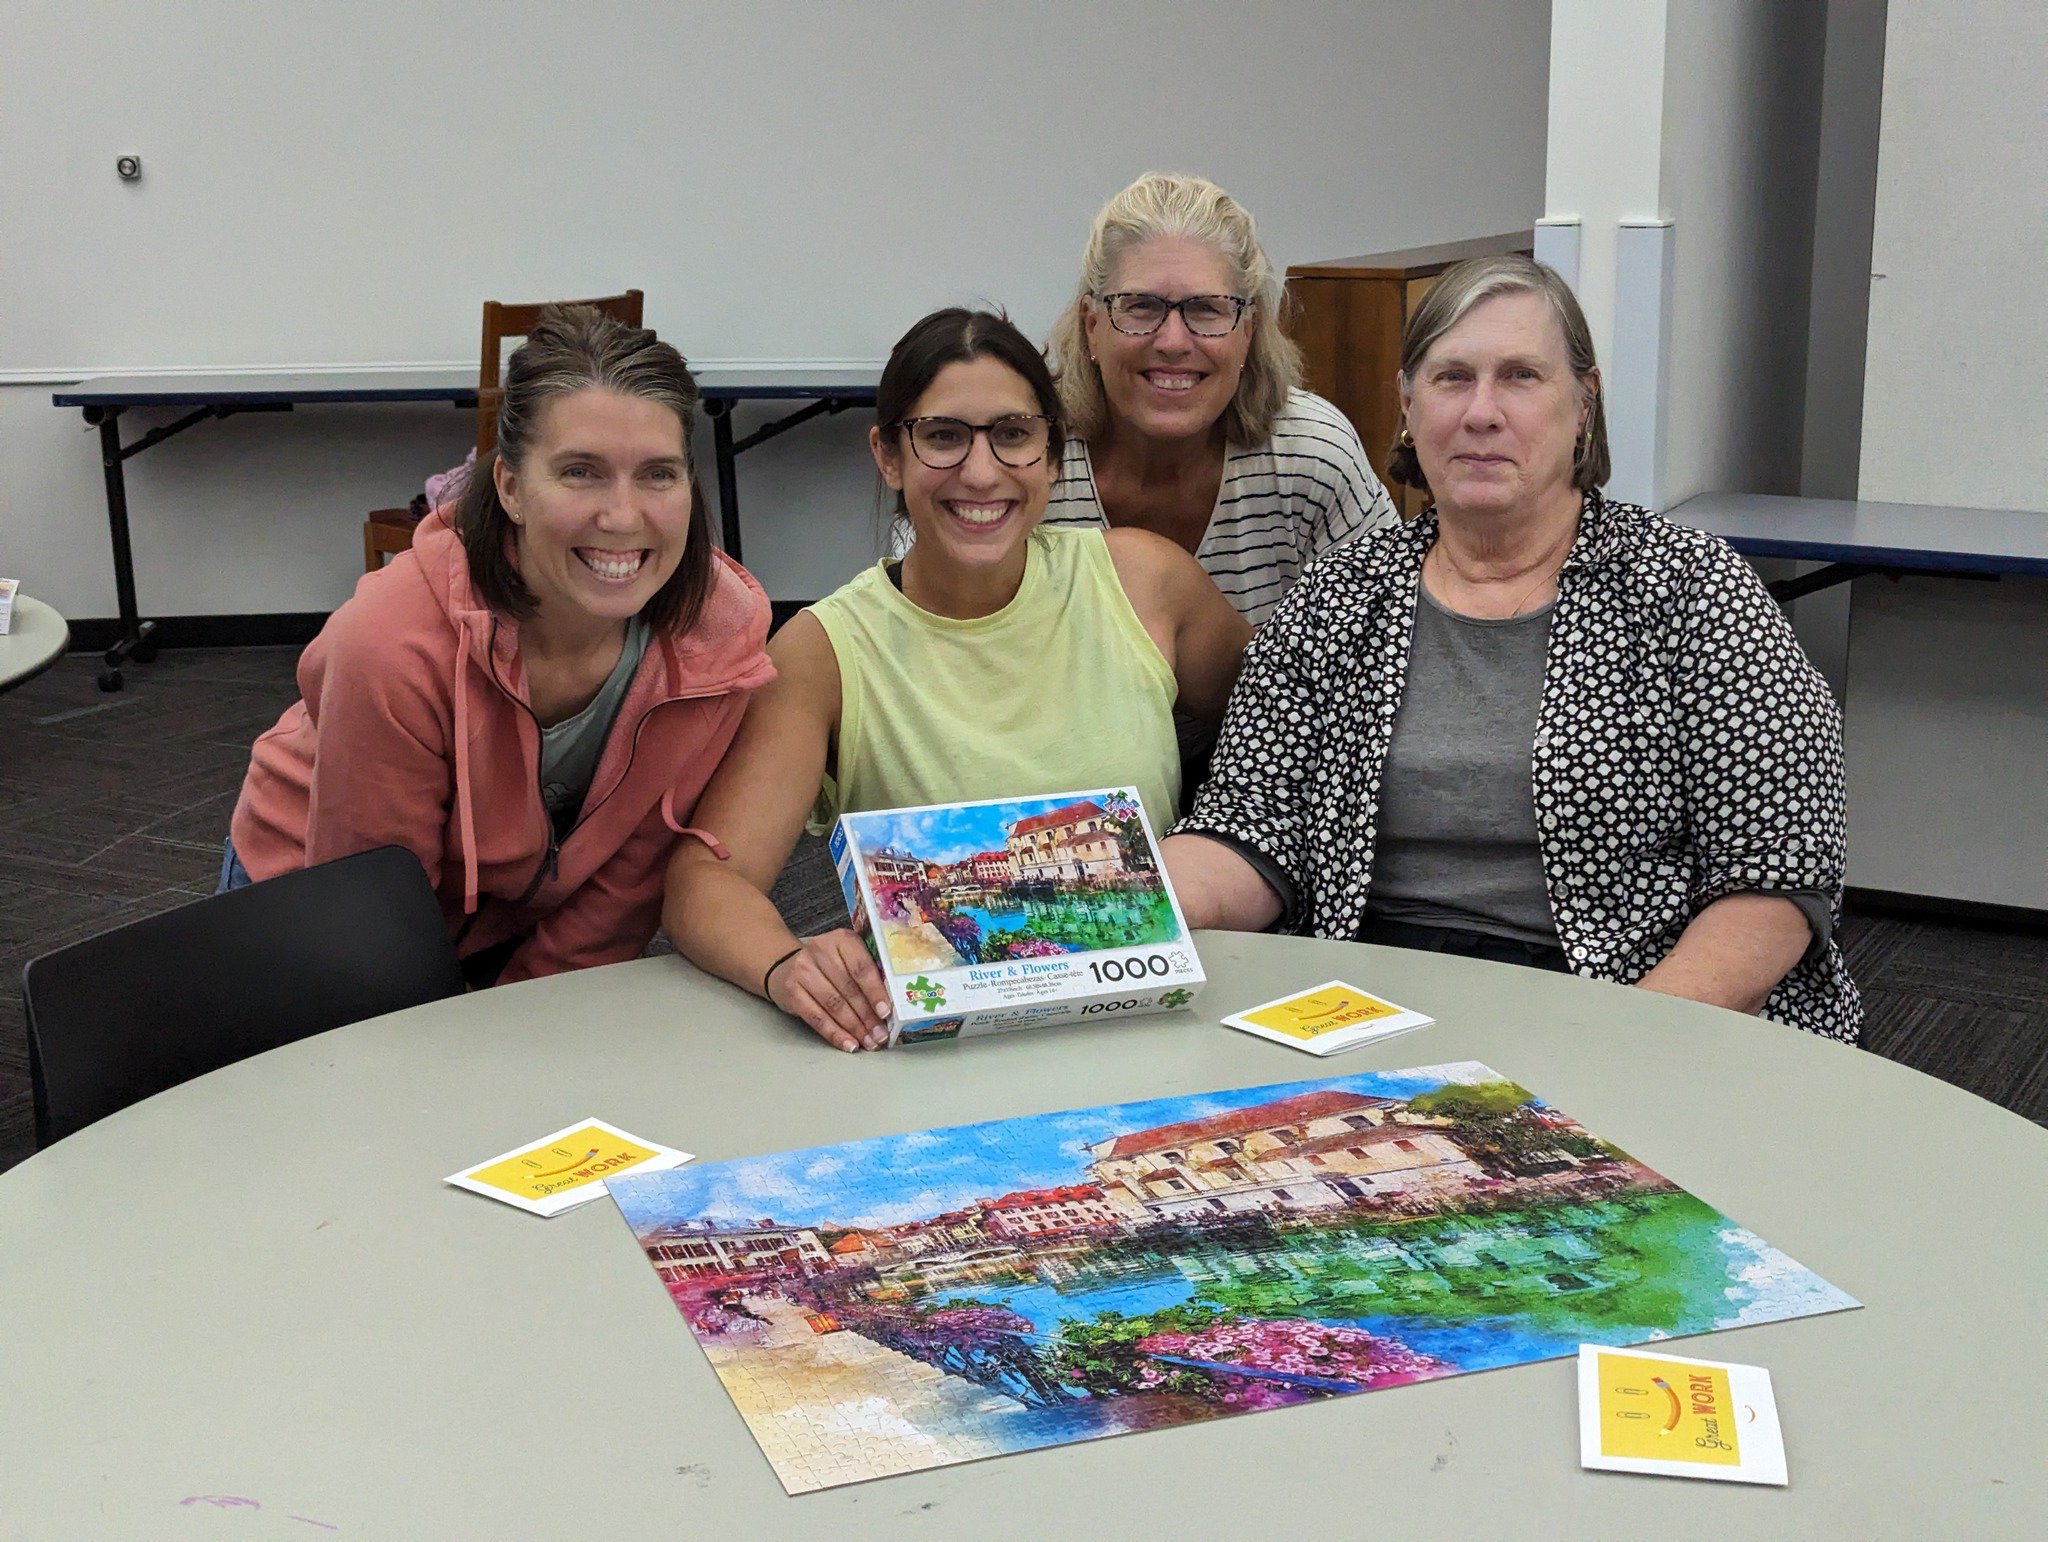 Group of patrons around a puzzle after winning the puzzle contest at the library.